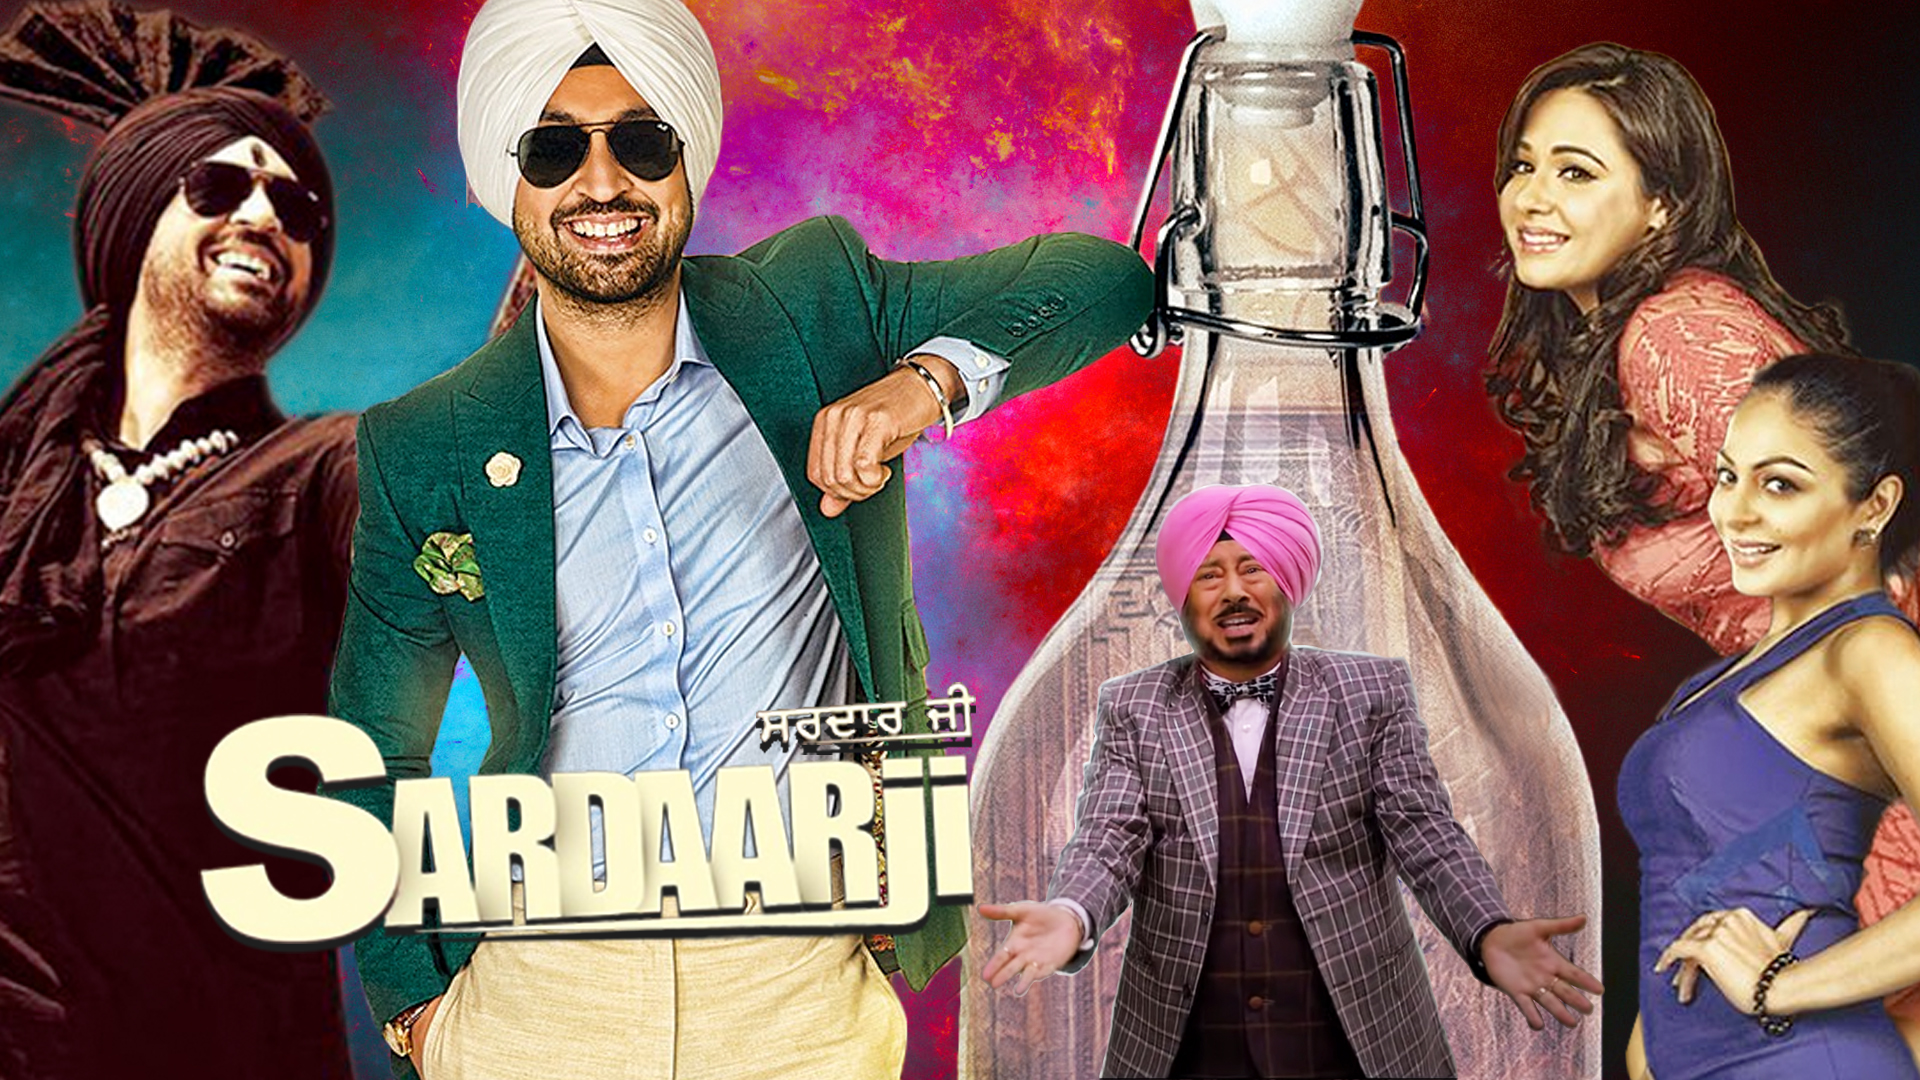 allie mayberry recommends sardaar ji full movie hd pic